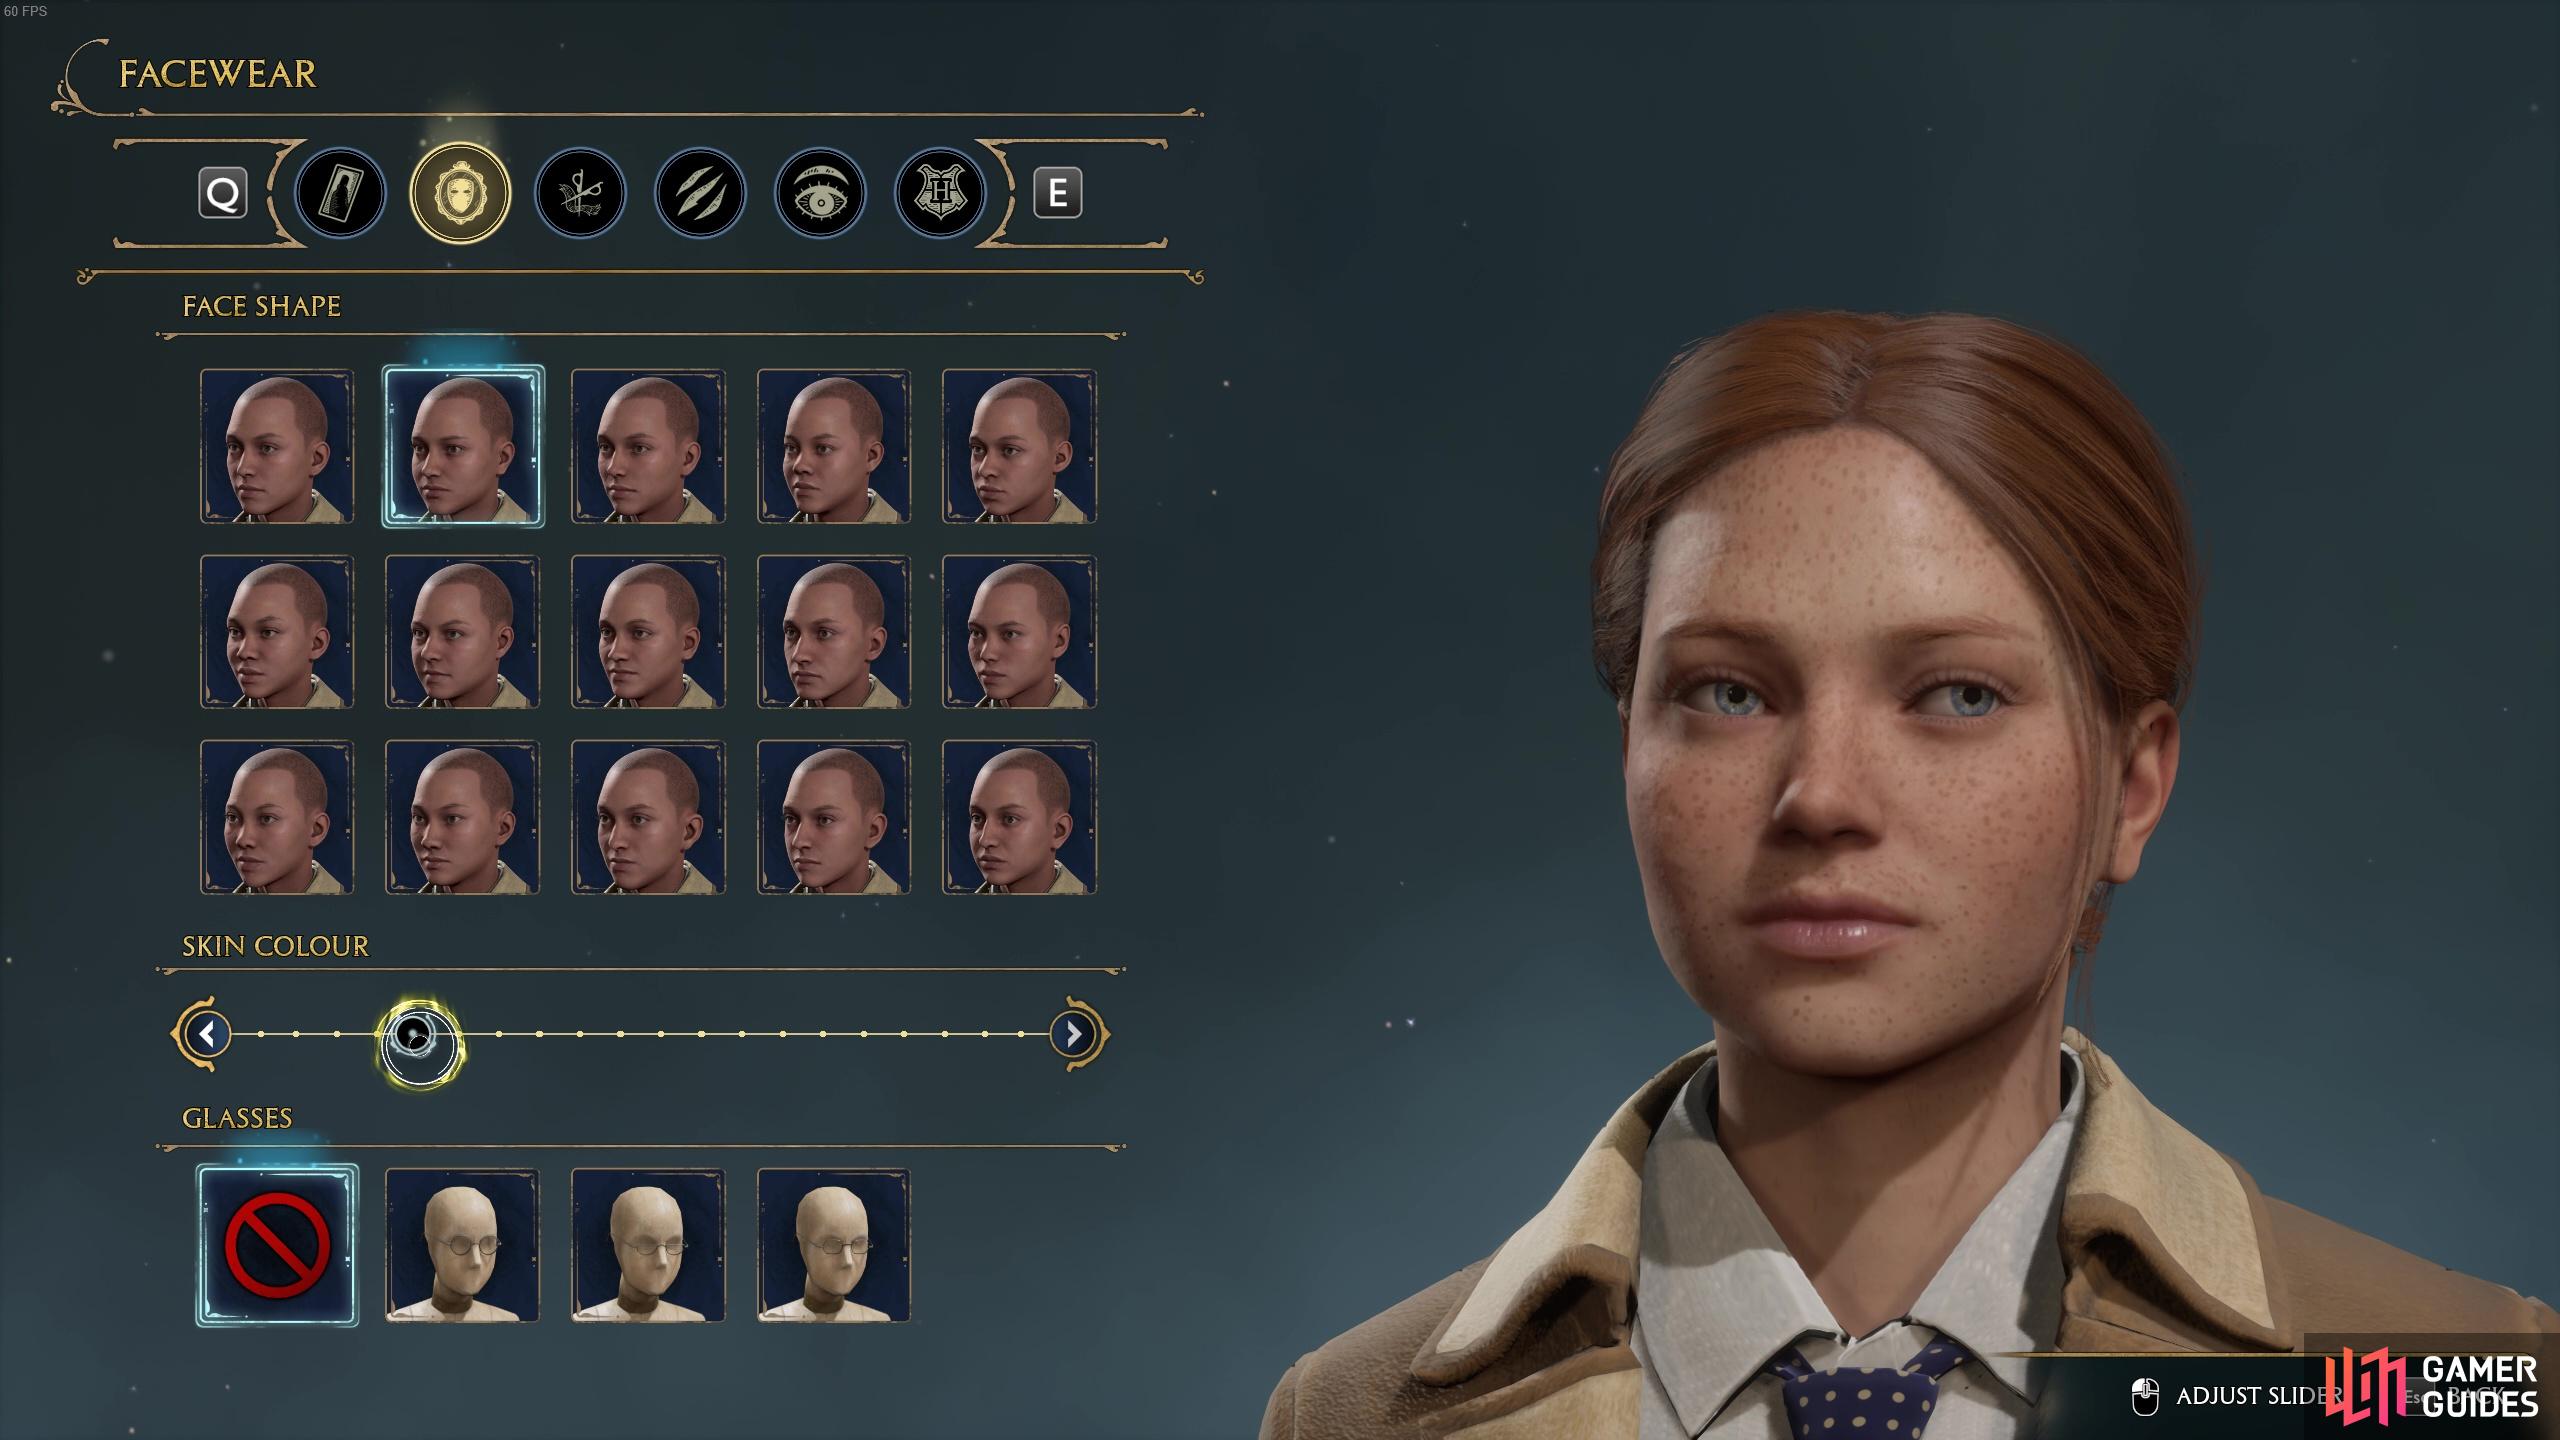 The face shape options will switch up your character's facial features.